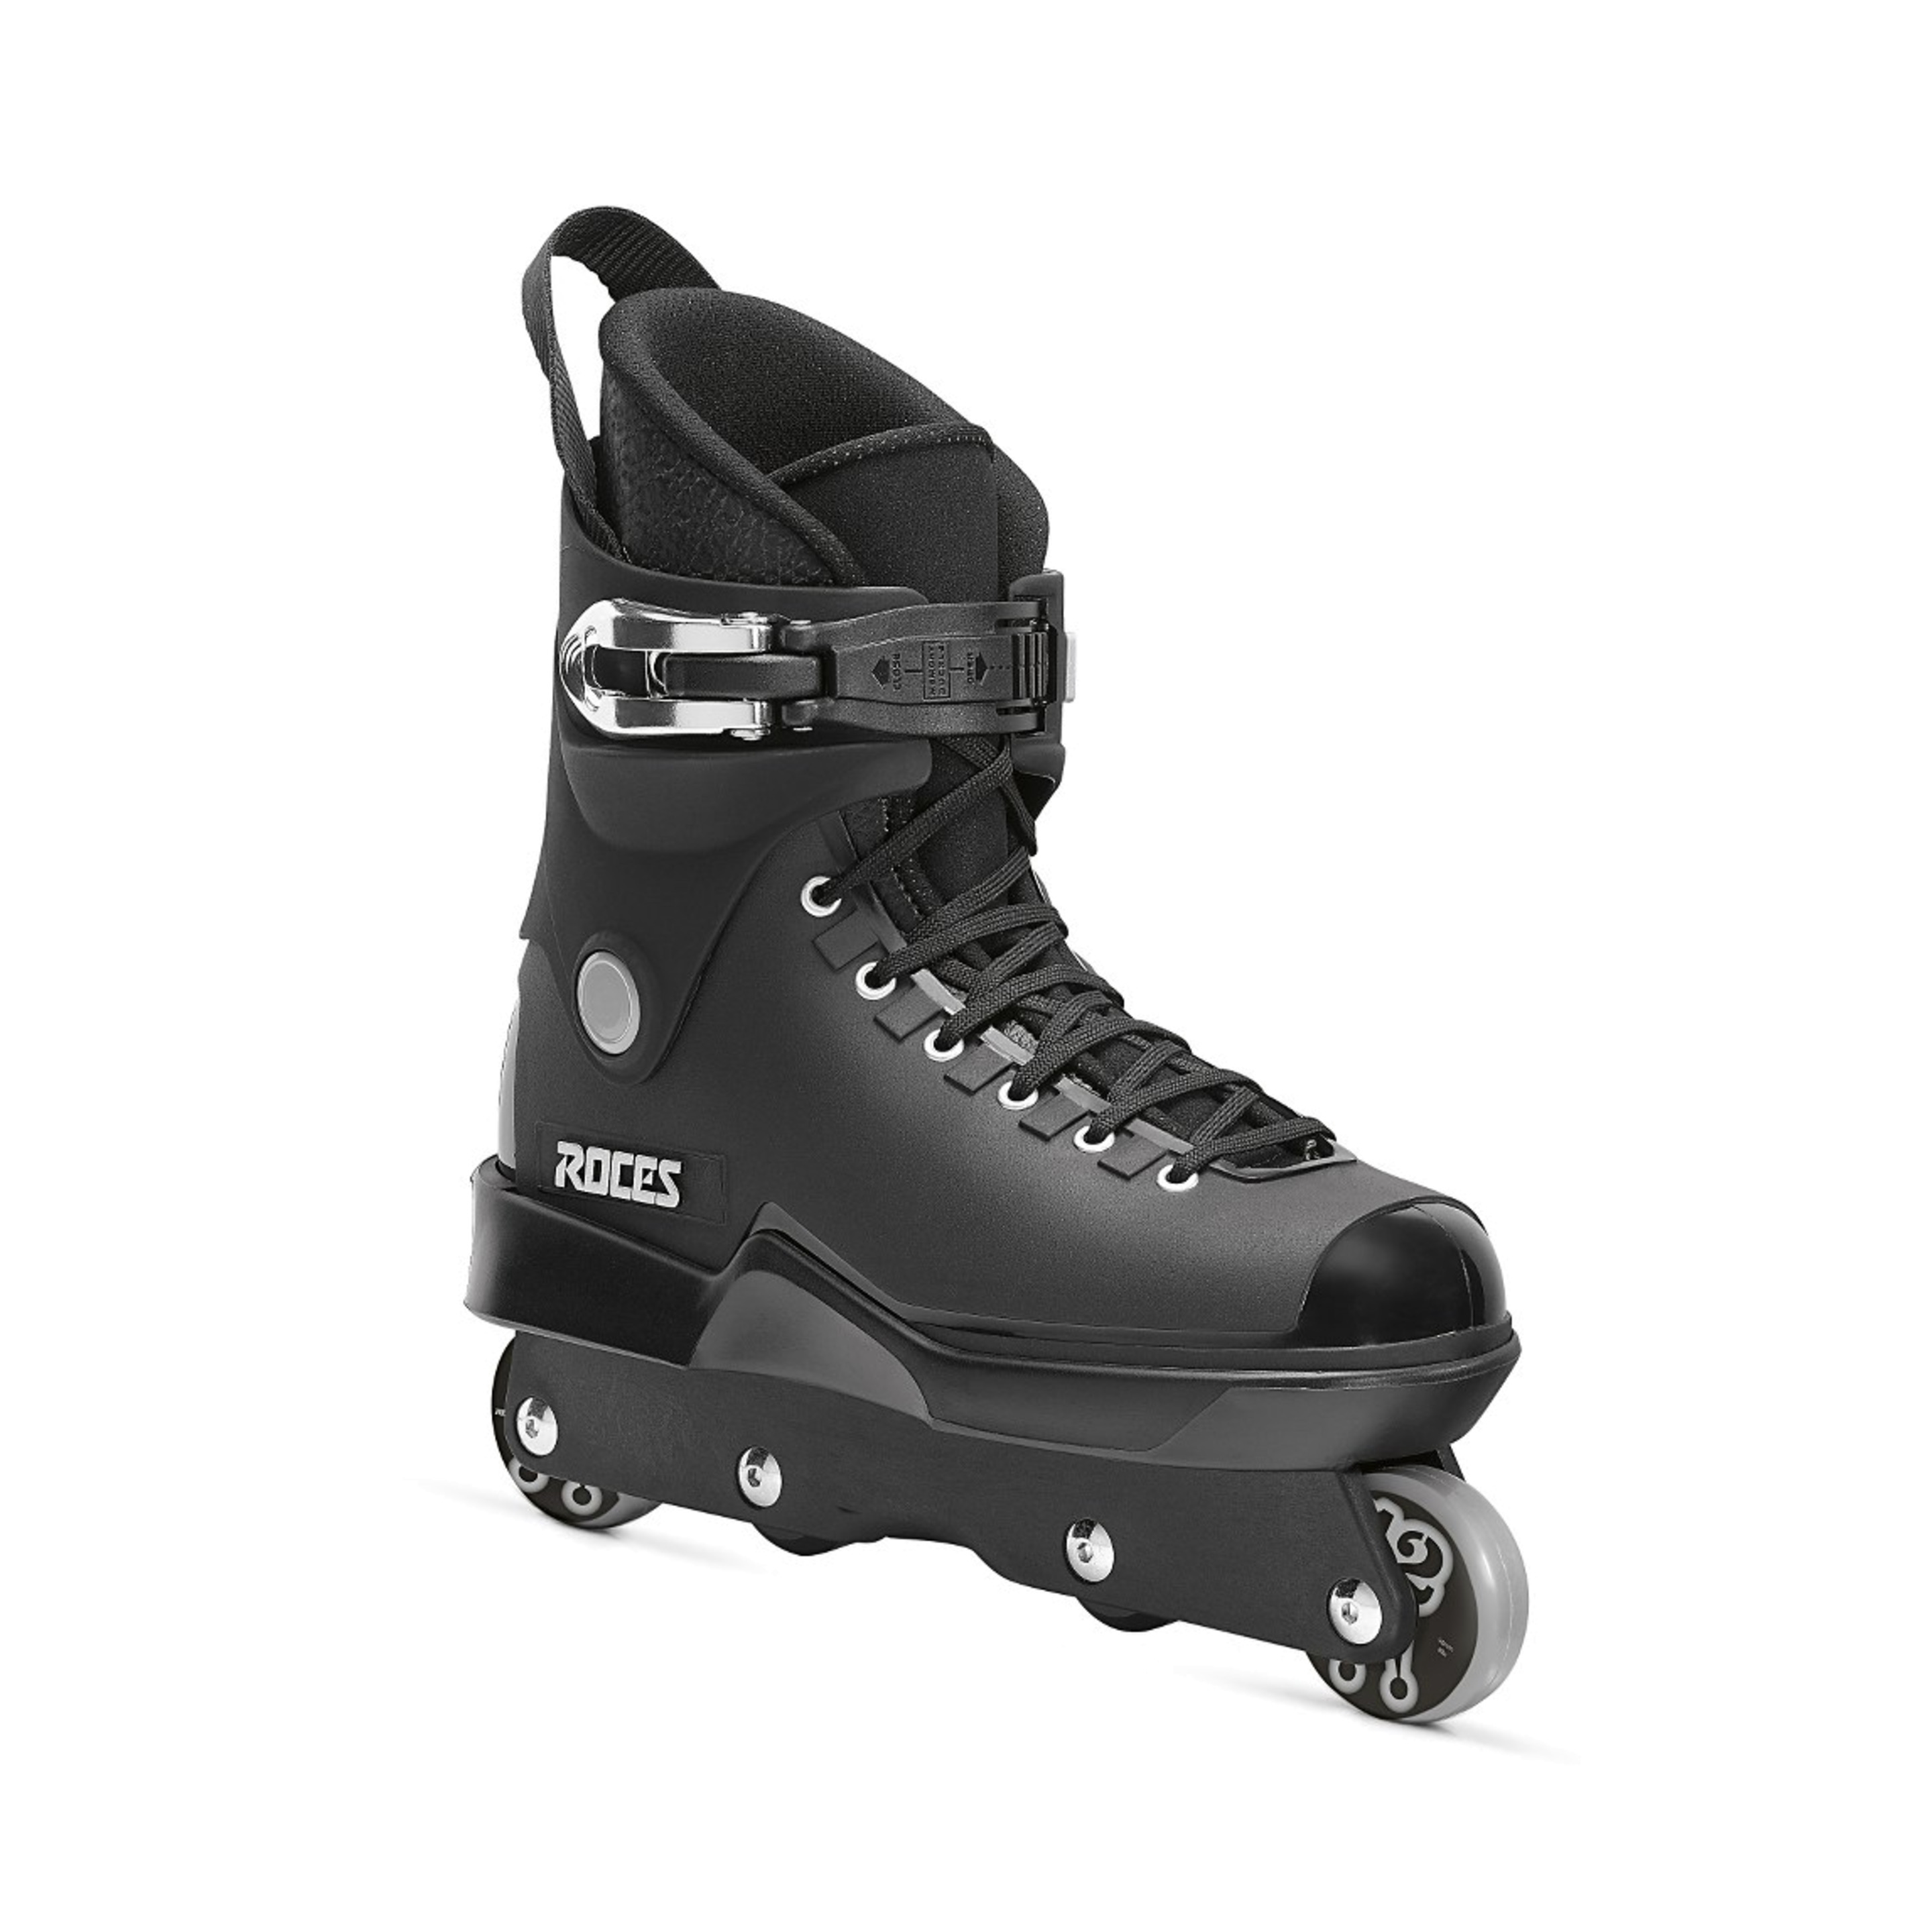 Patines Agresivo Roces M12 Ufs